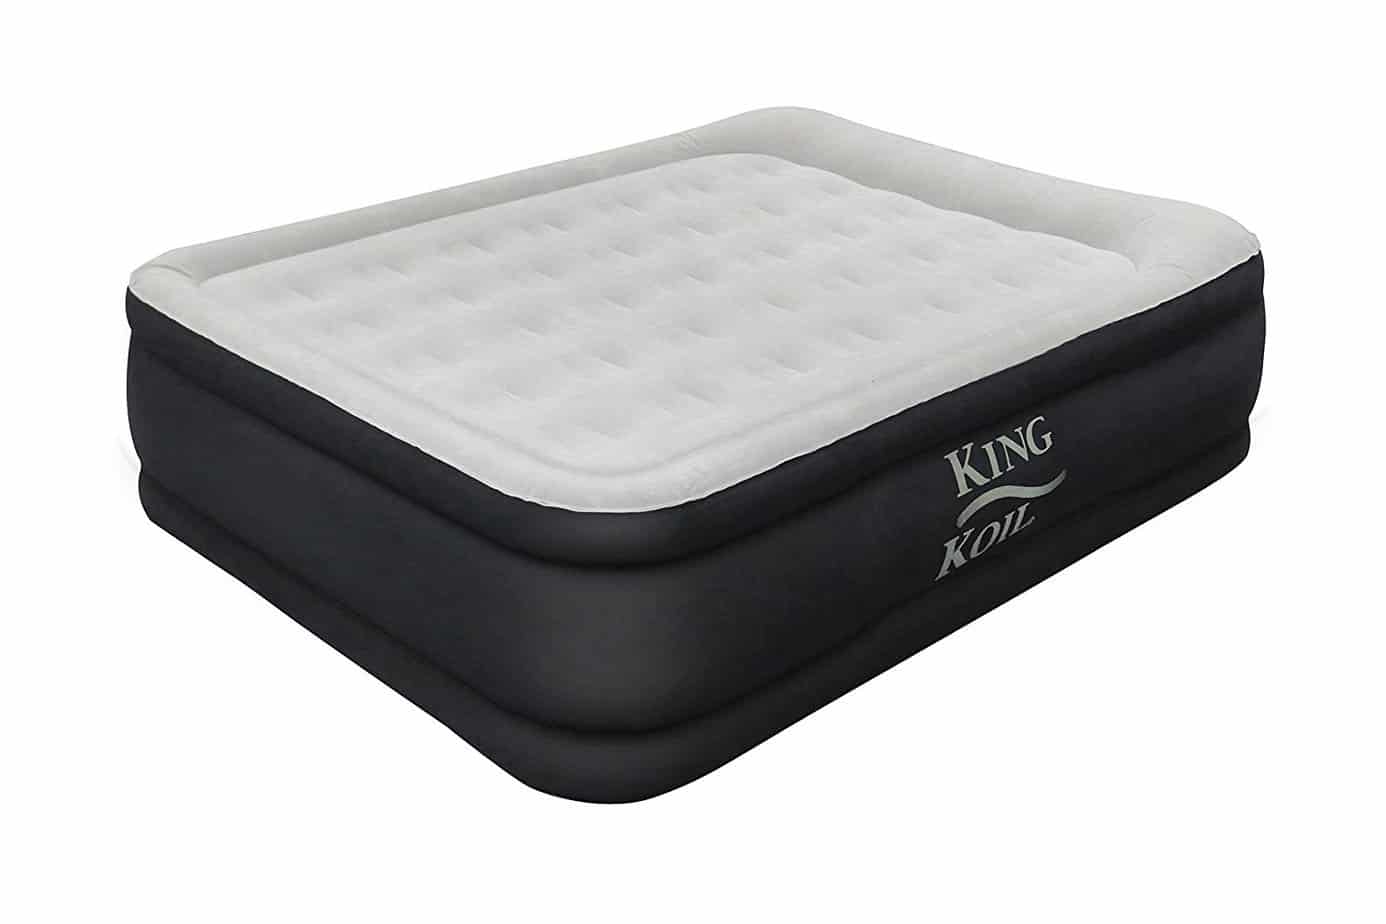 most expenssive air mattress with pump